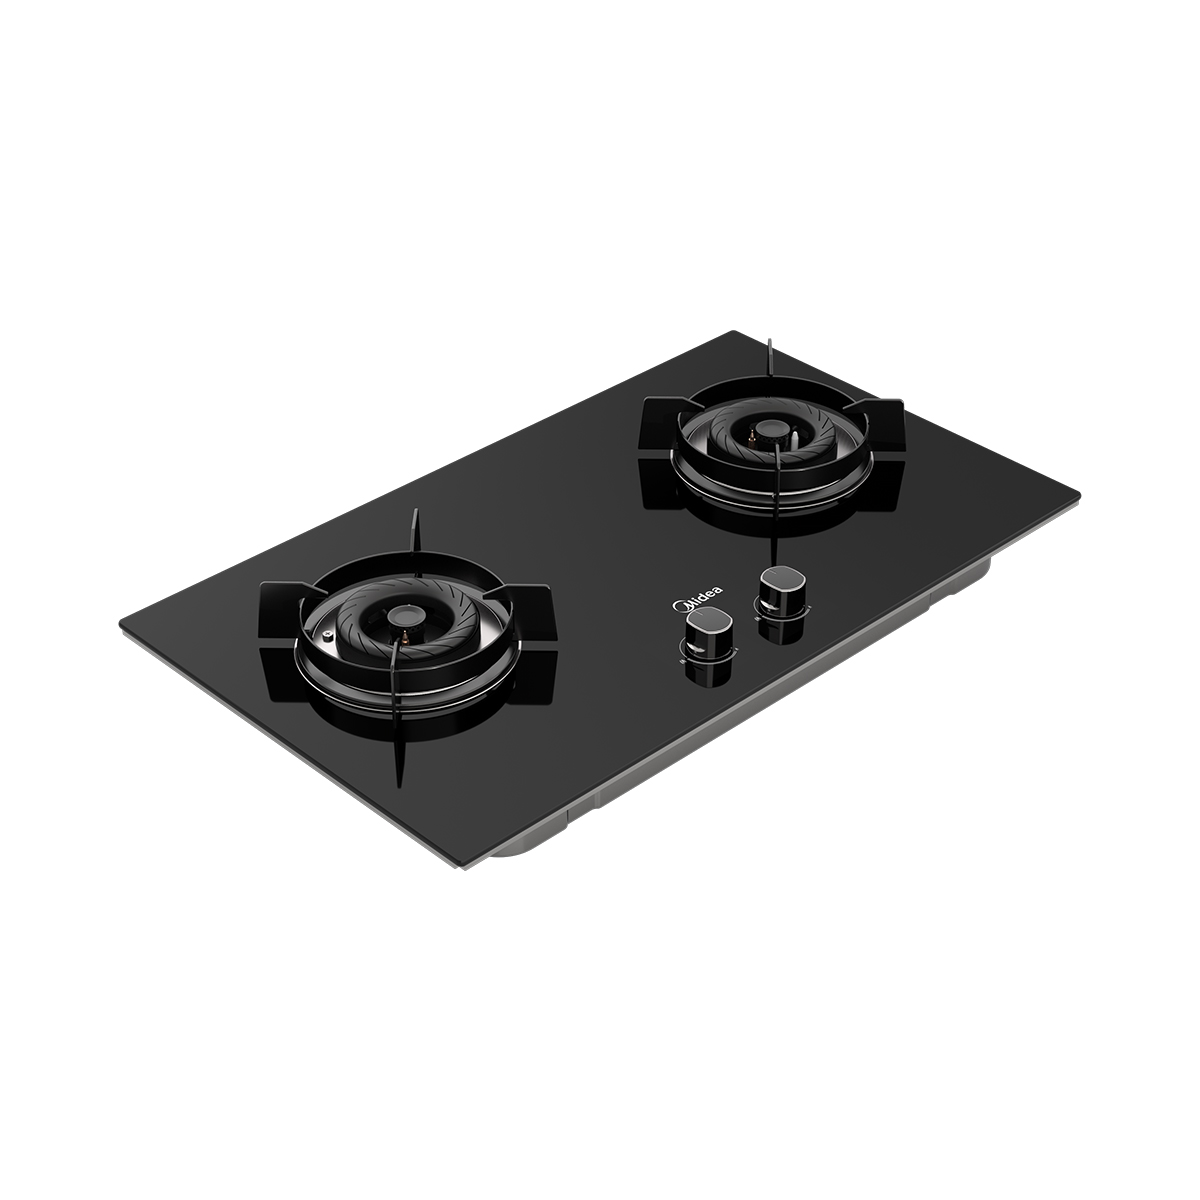 Description: Built-in Gas Hob with 5.2kW Burners - MGH-2461GL